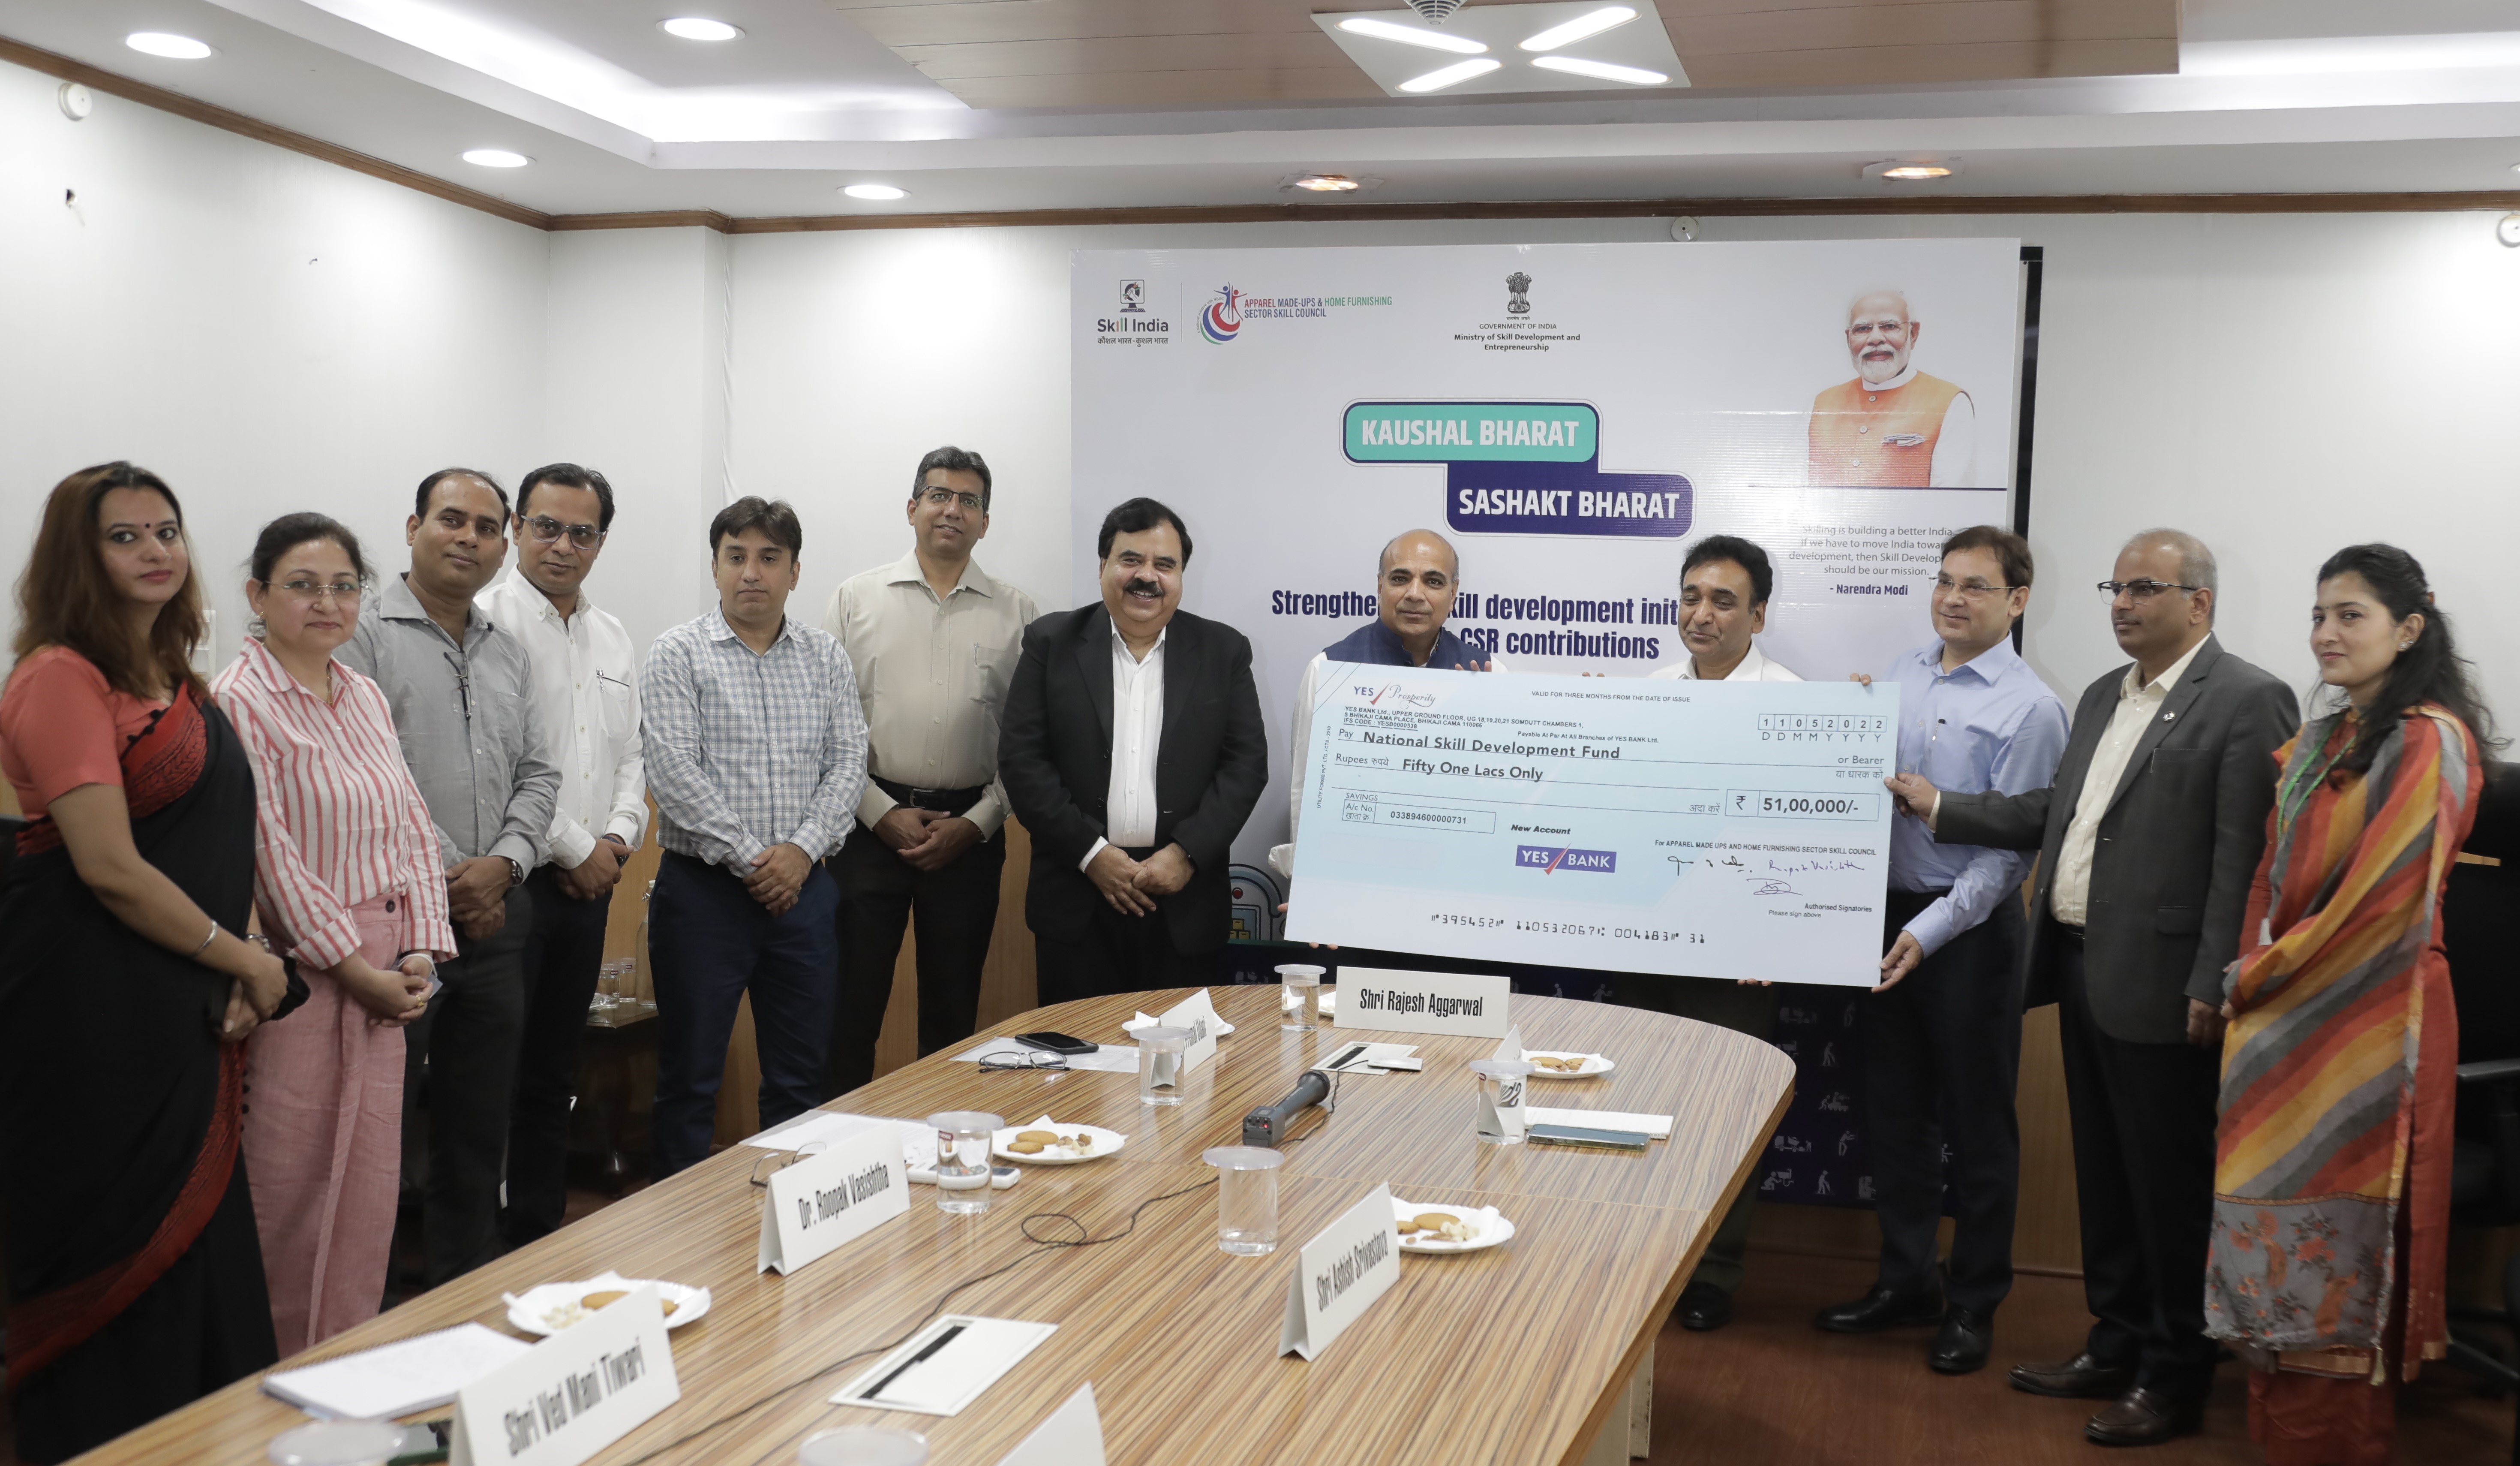 Apparel Made-ups, Home Furnishing Sector Skill Council donates 51 lakhs CSR fund to National Skill Development Fund (NSDF) for skill development and capacity building